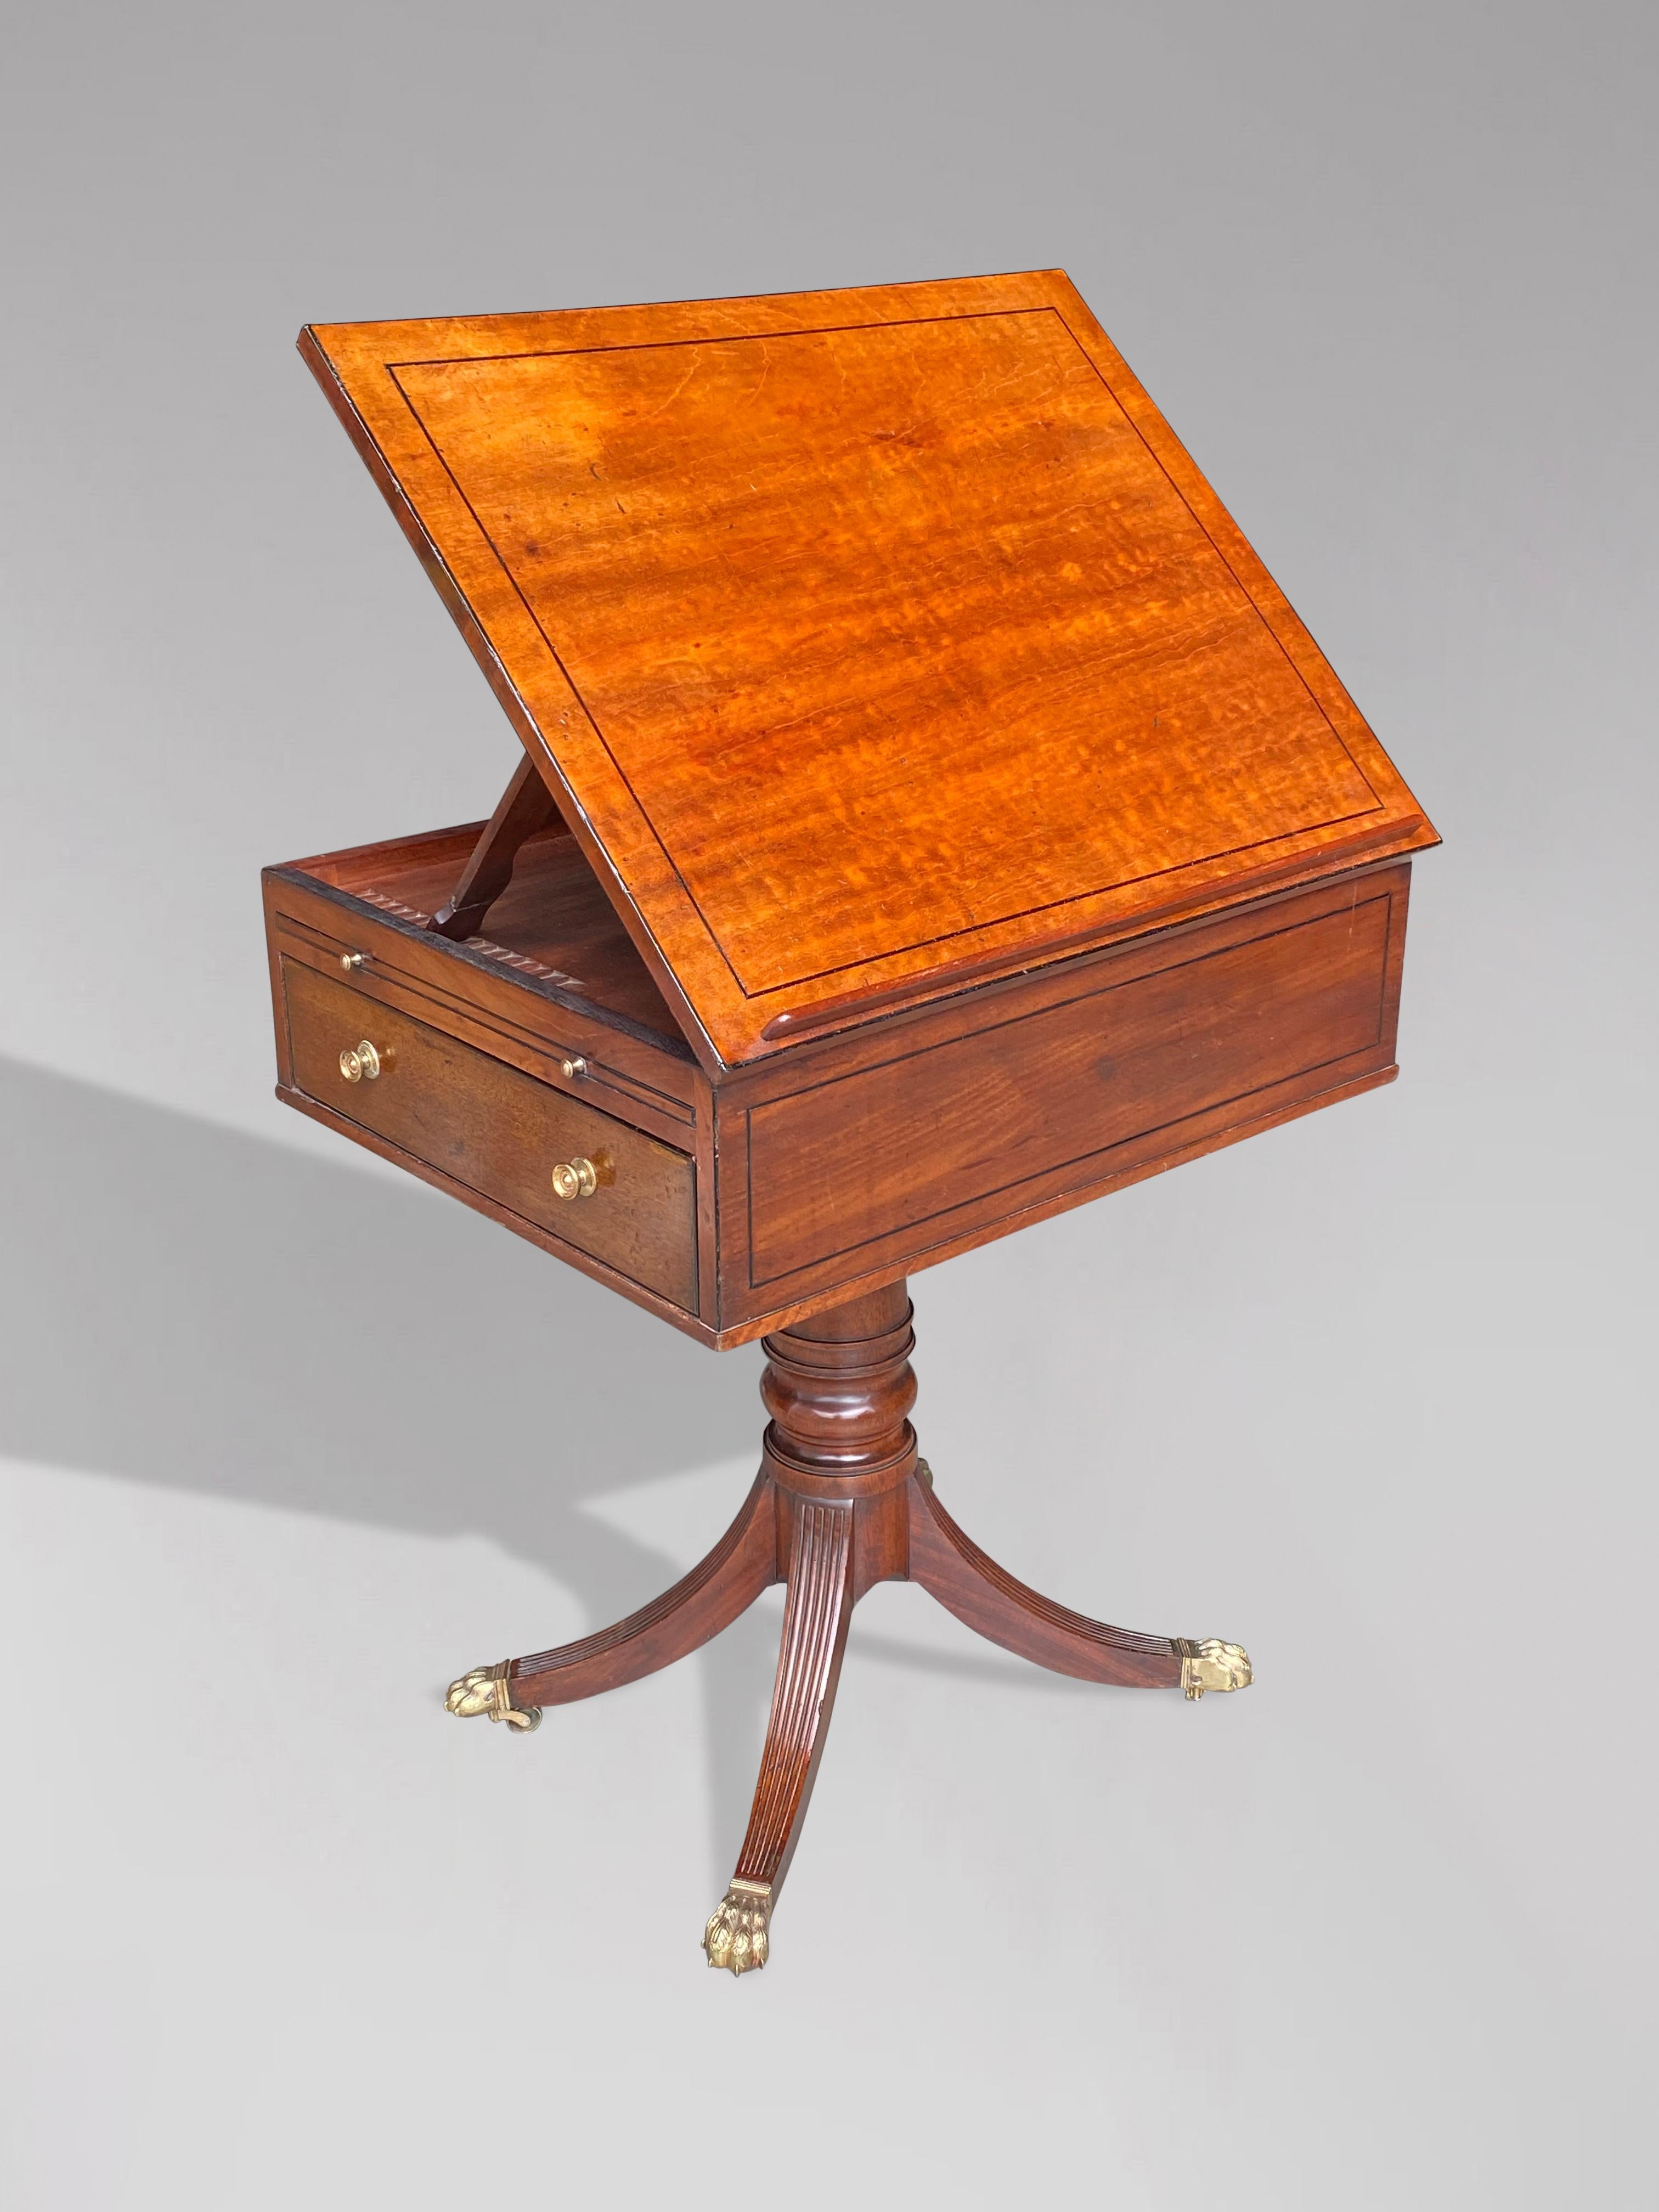 A fine early 19th century George III period mahogany and ebony inlay reading table. The table features one faux drawer to one side and has a rise and fall reading slope. One side of the table having a working mahogany lined drawer and slide with